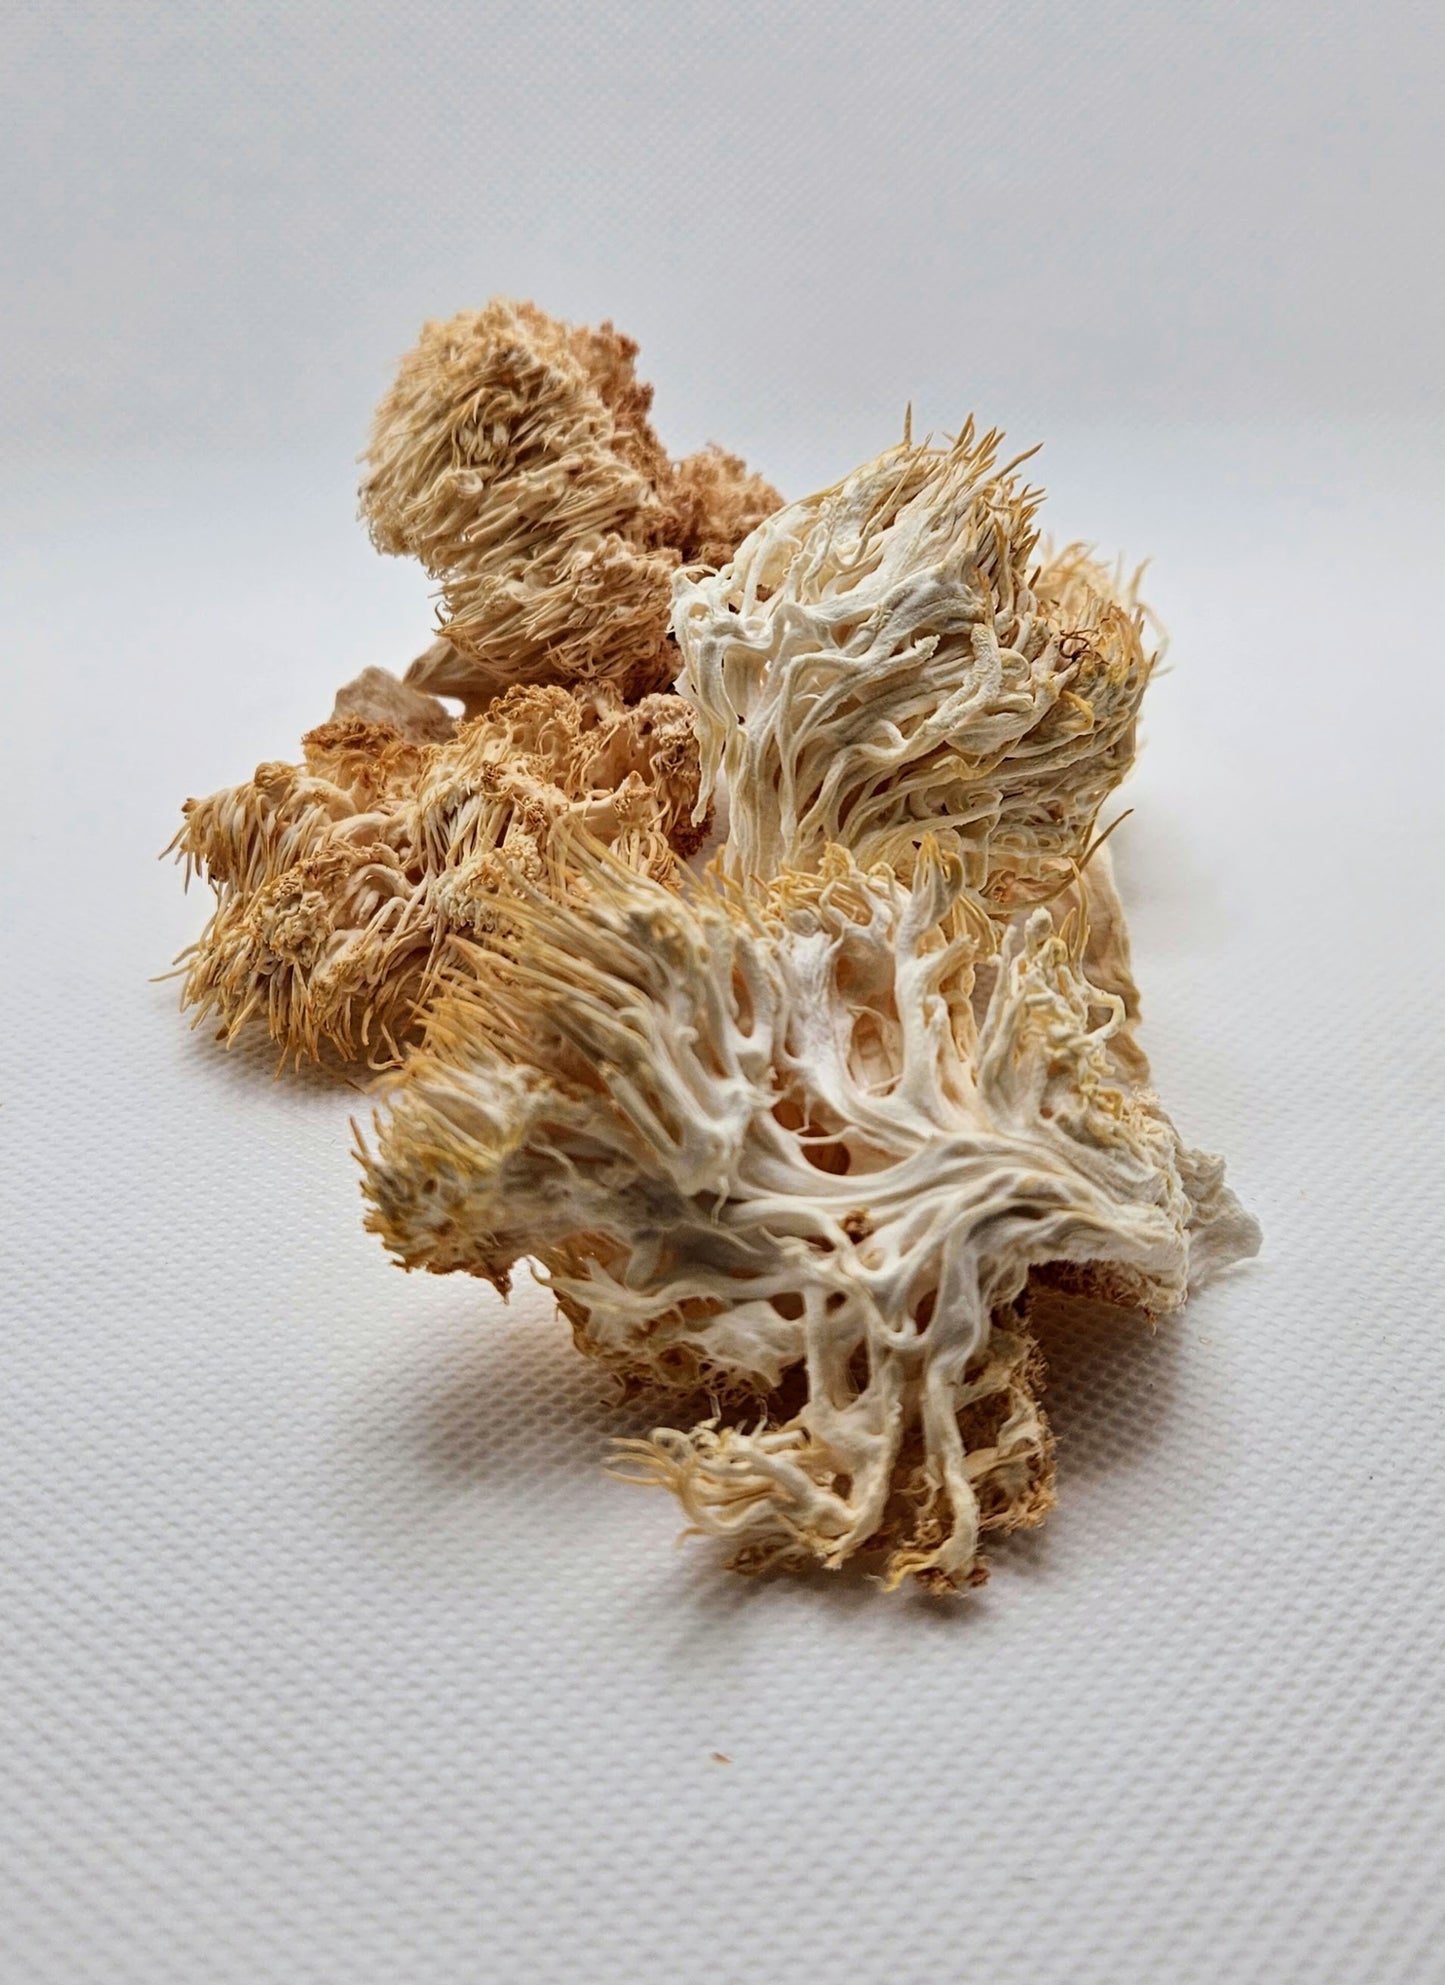 dried lionsmane clusters slightly yellow elongated dentrites beautifully arranged